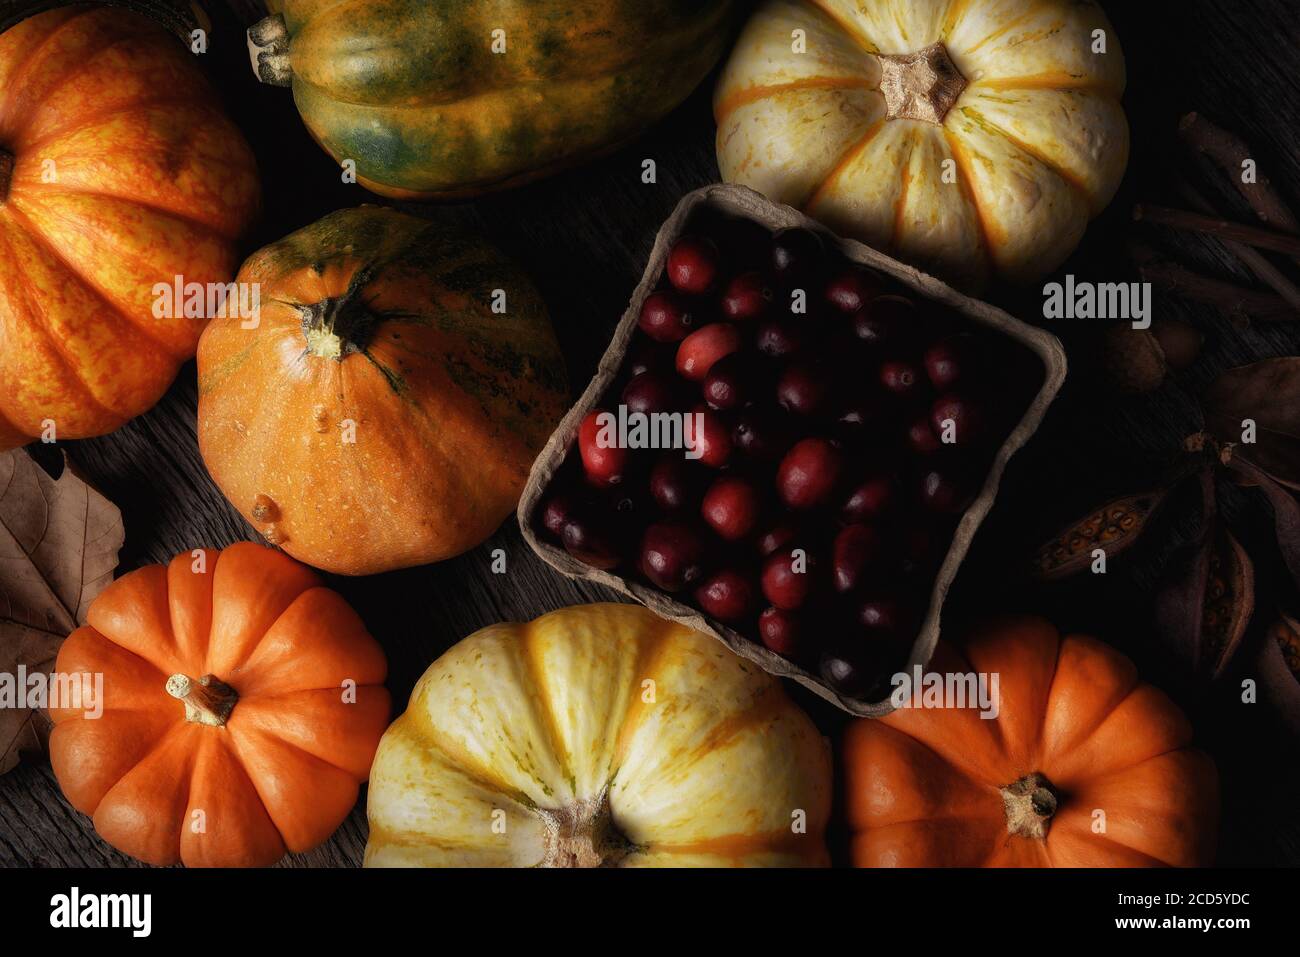 Flat Lay Autumn Still Life with warm side light. An assortment of Fall decorative gourds, squash and pumpkins around a basket of fresh cranberries. Stock Photo